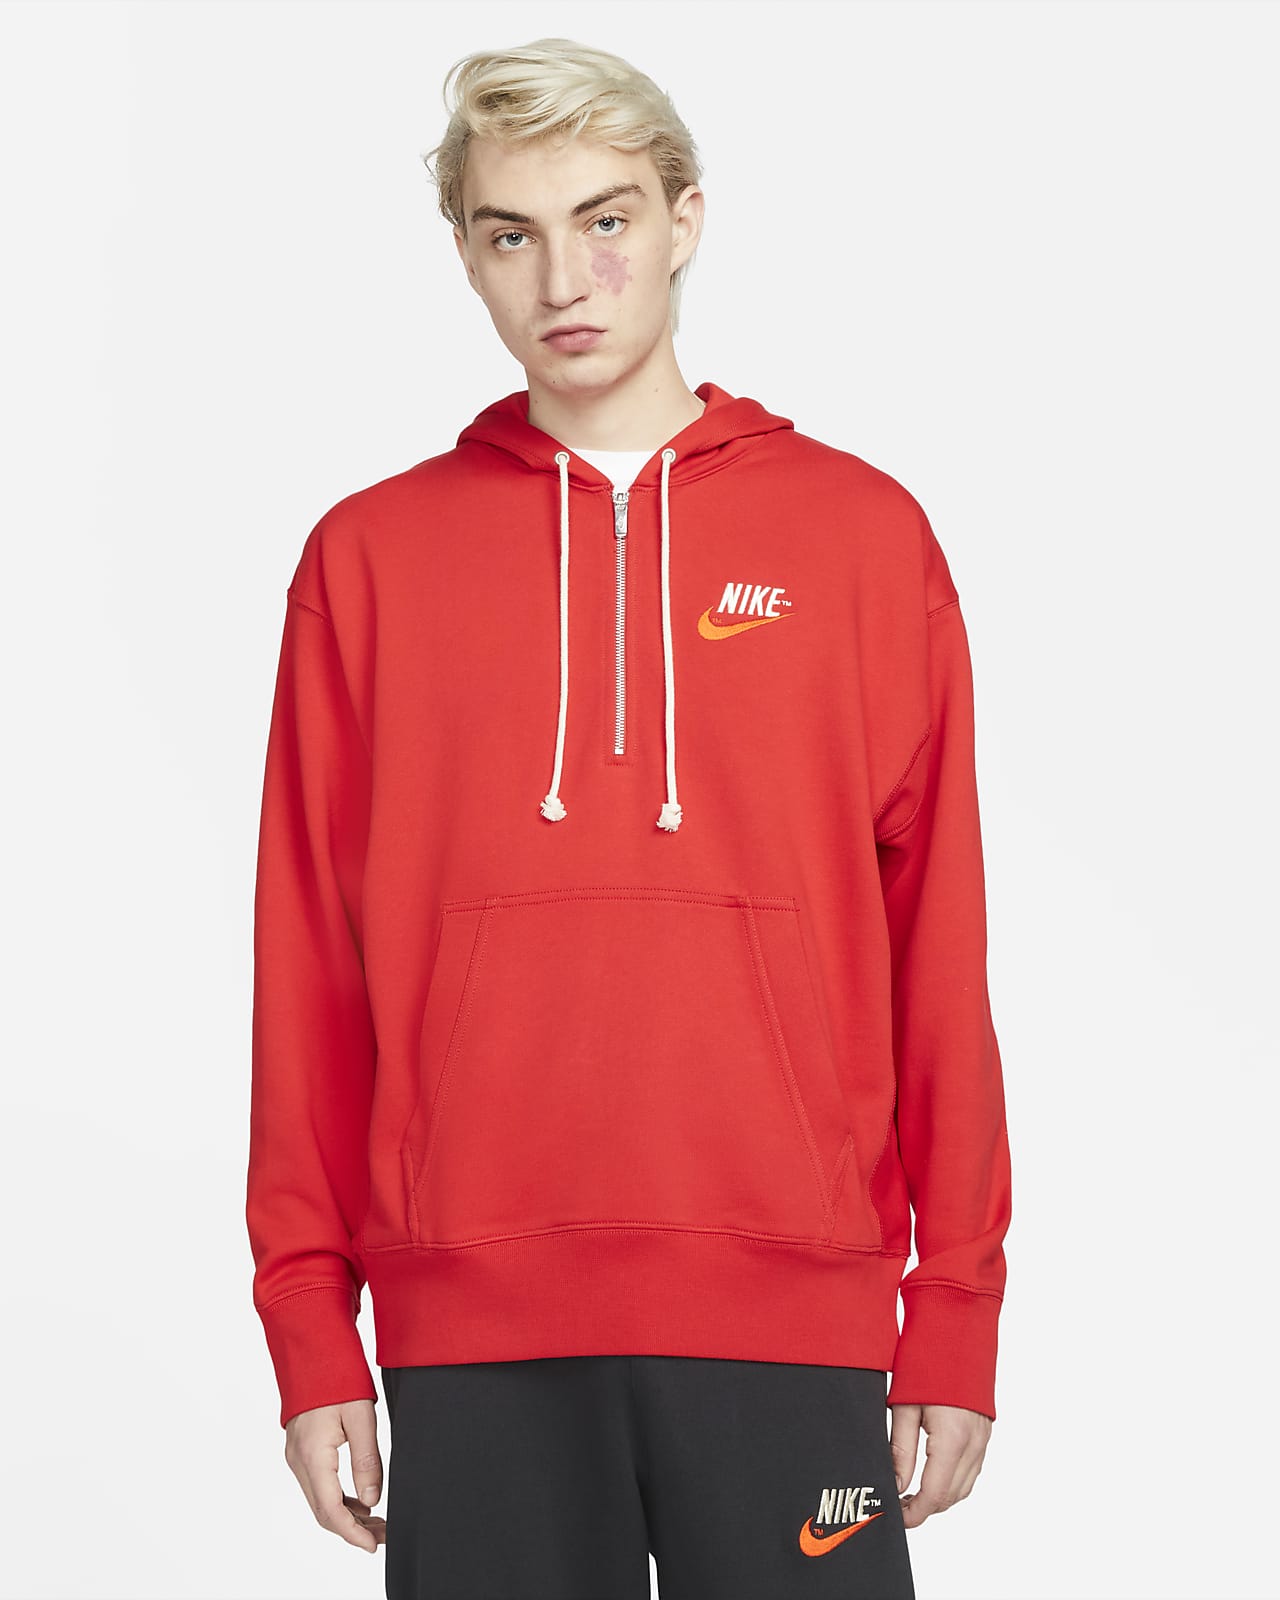 Nike Sportswear Men's French Terry Pullover Hoodie. Nike SA